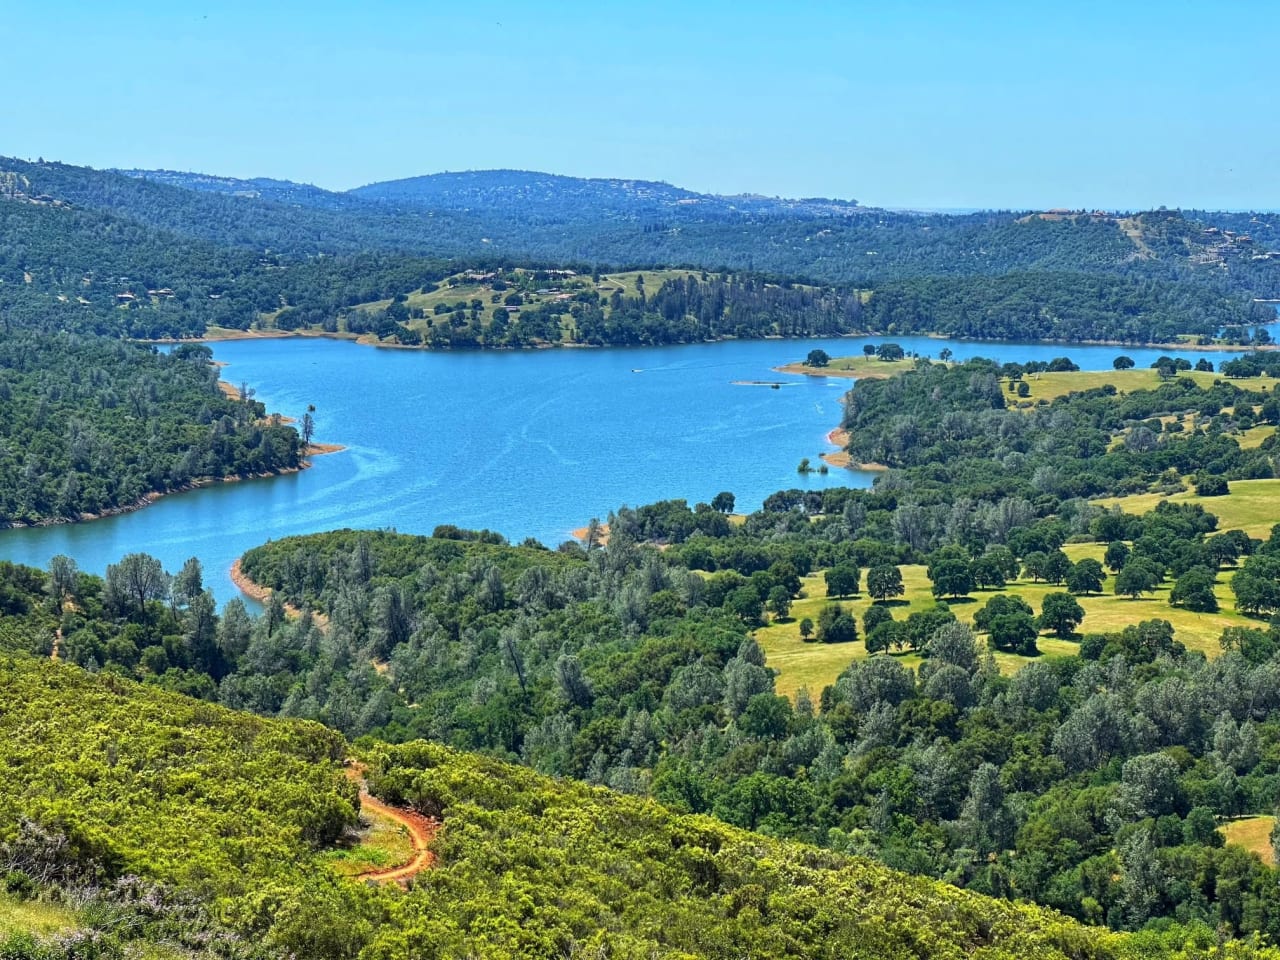 View of Folsom Lake from Once in a Lifetime Trail at Salmon Falls